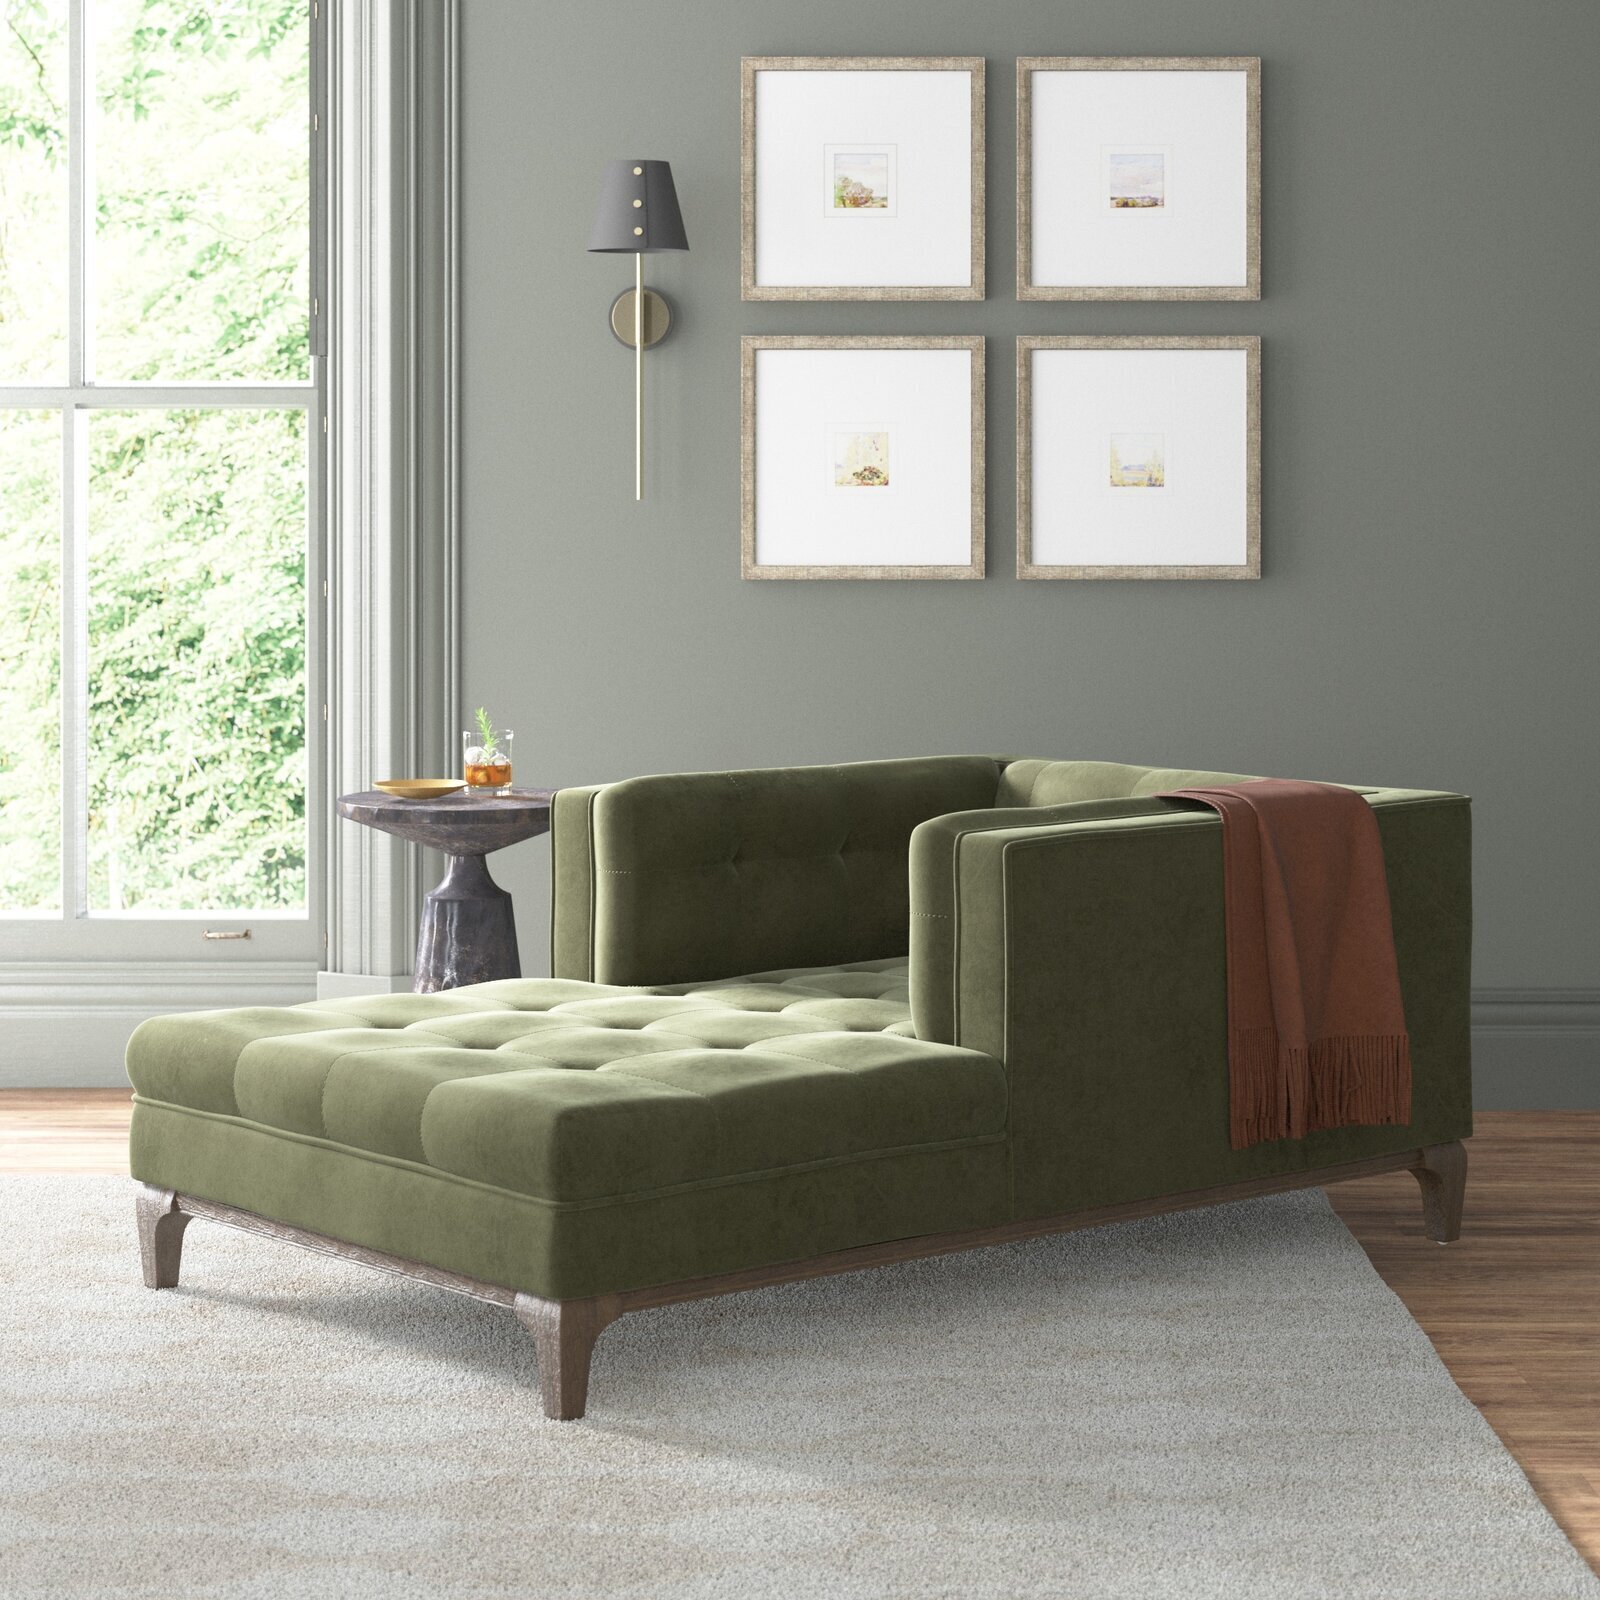 Low Profile Tufted Chaise Lounge